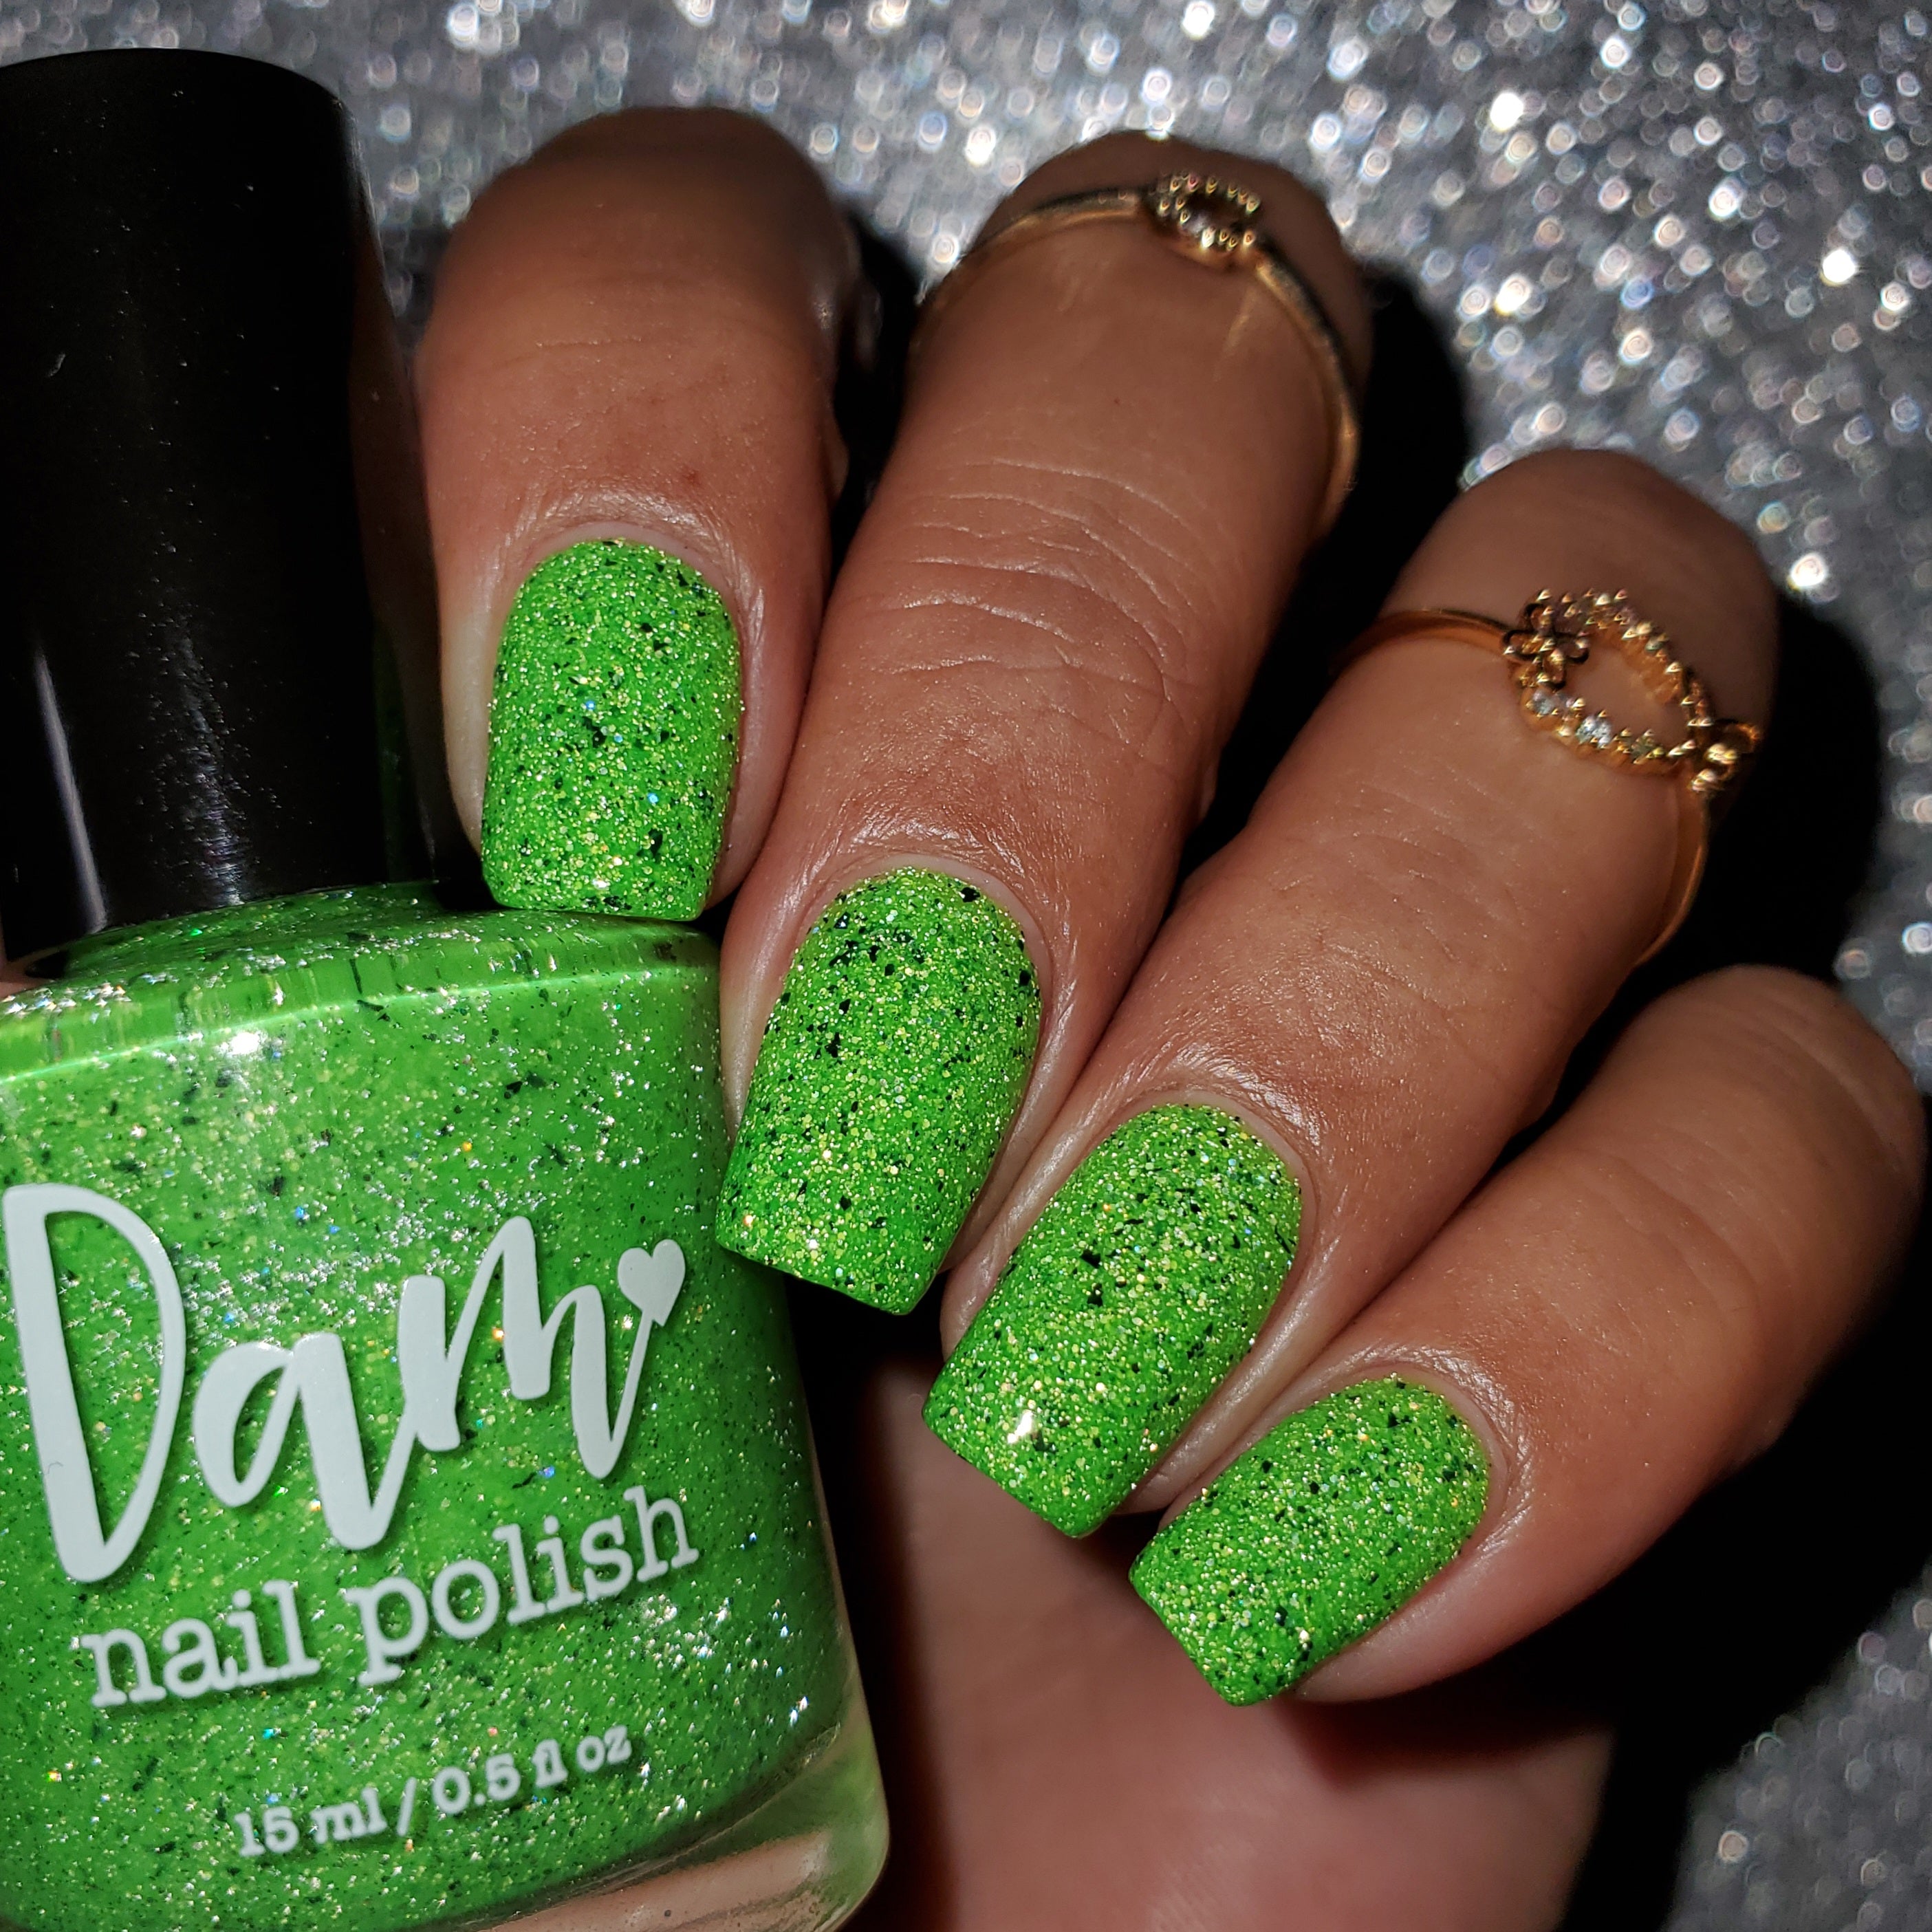 Press on Nail Almond Fluorescent Green Nail Easy to Wear for Daily Office  Routine Duties - Walmart.com